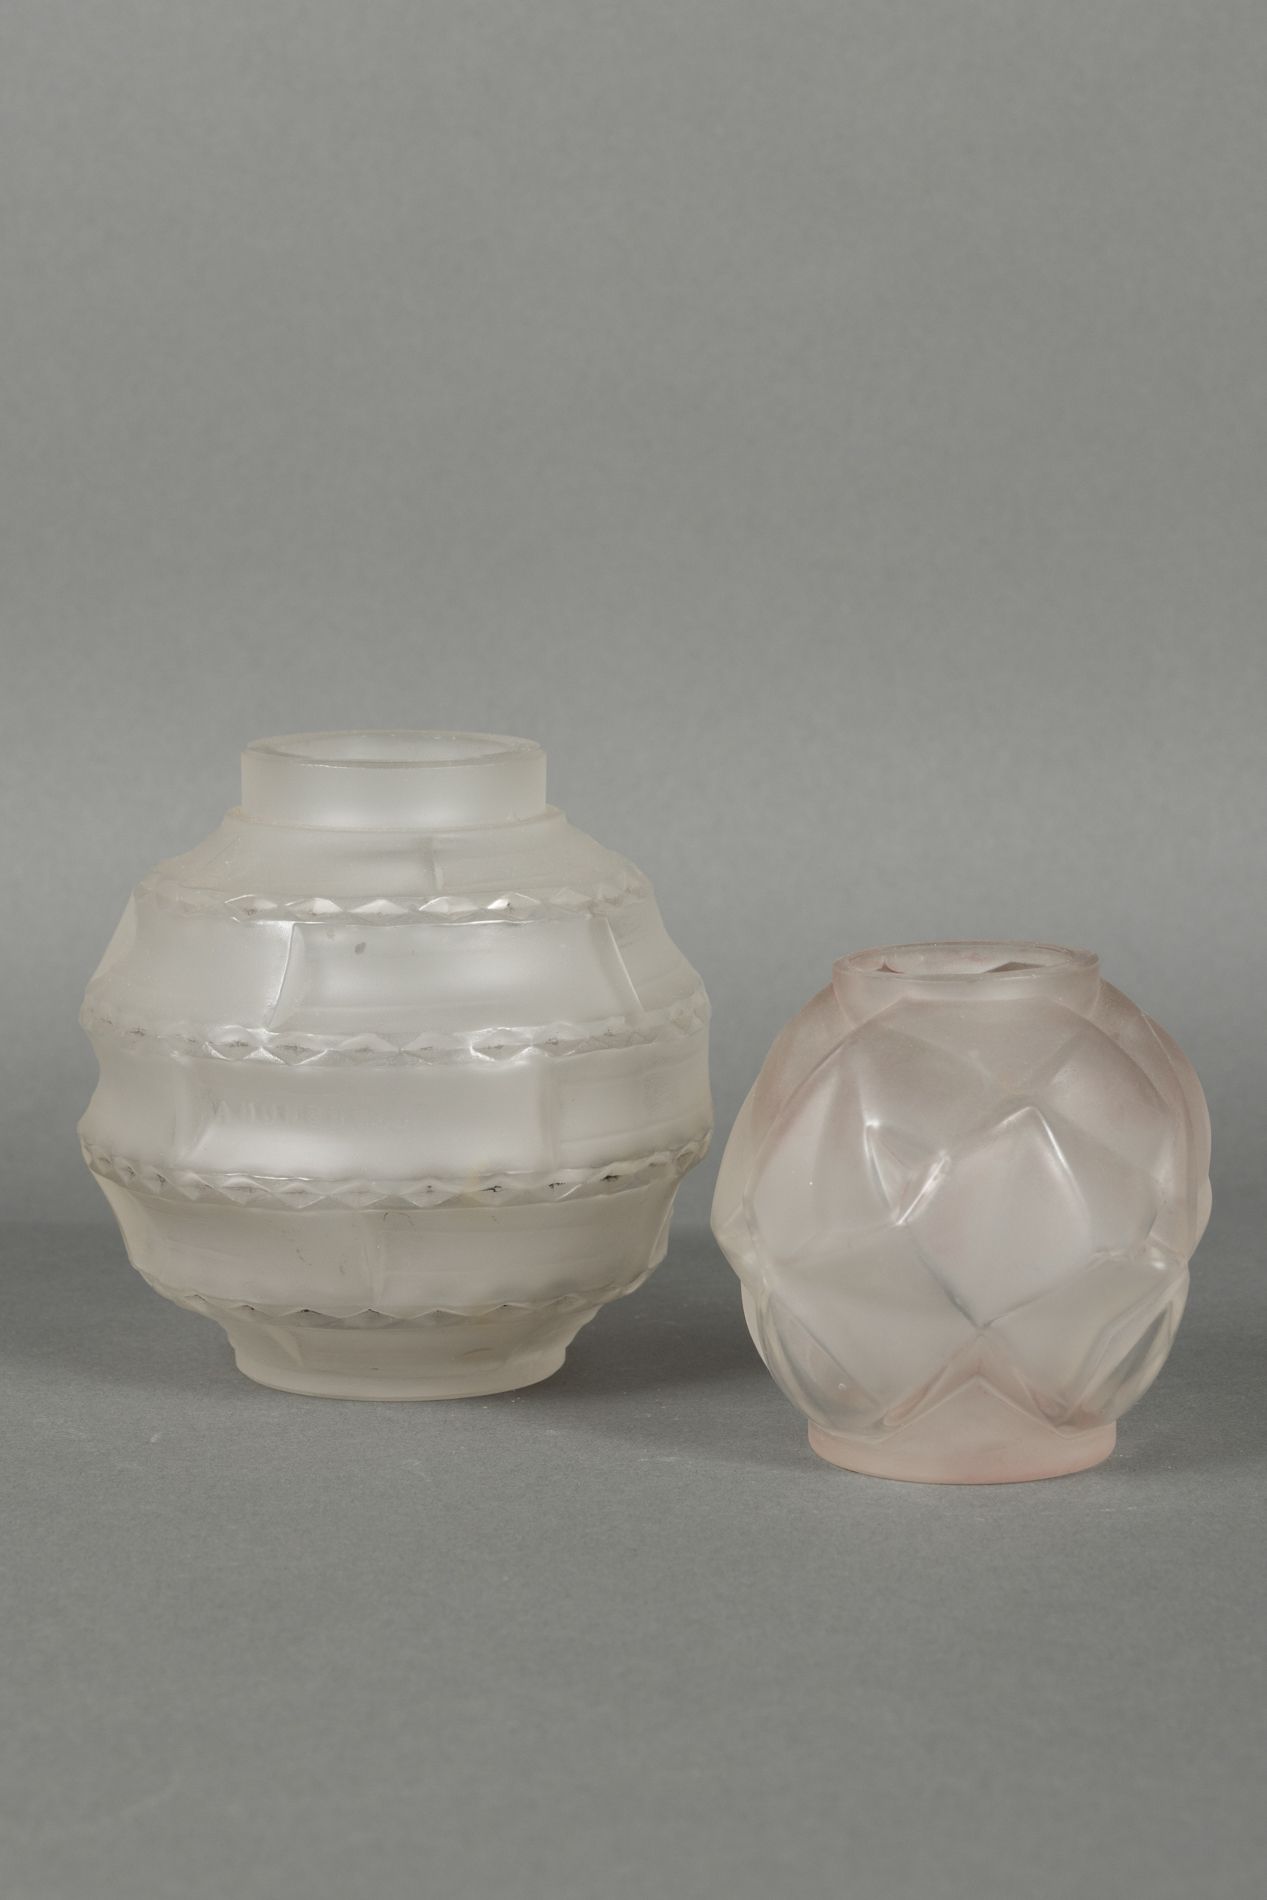 Null André HUNEBELLE (1896-1985)
Set of two small molded glass ball vases. Signe&hellip;